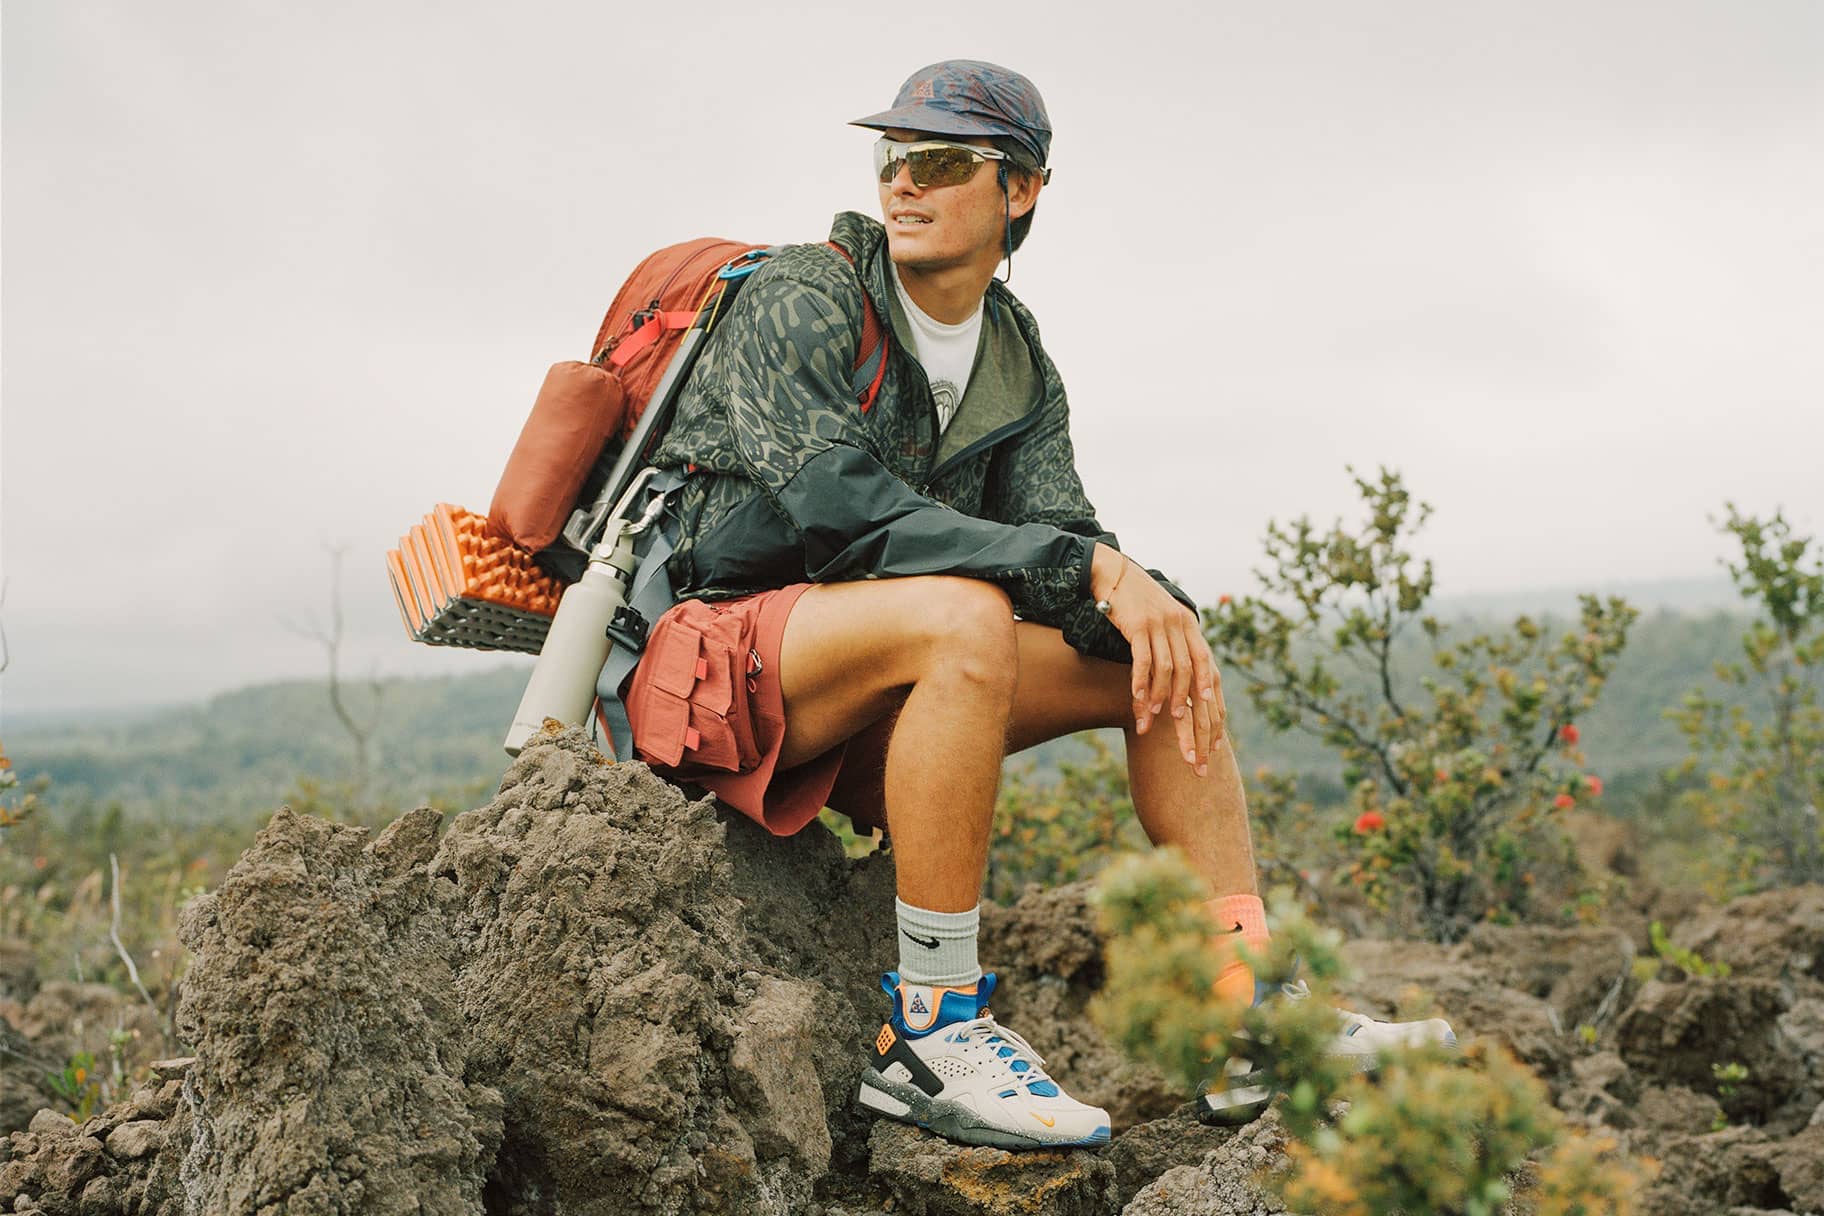 The Best Camping Outfits for Men and Women. Nike.com